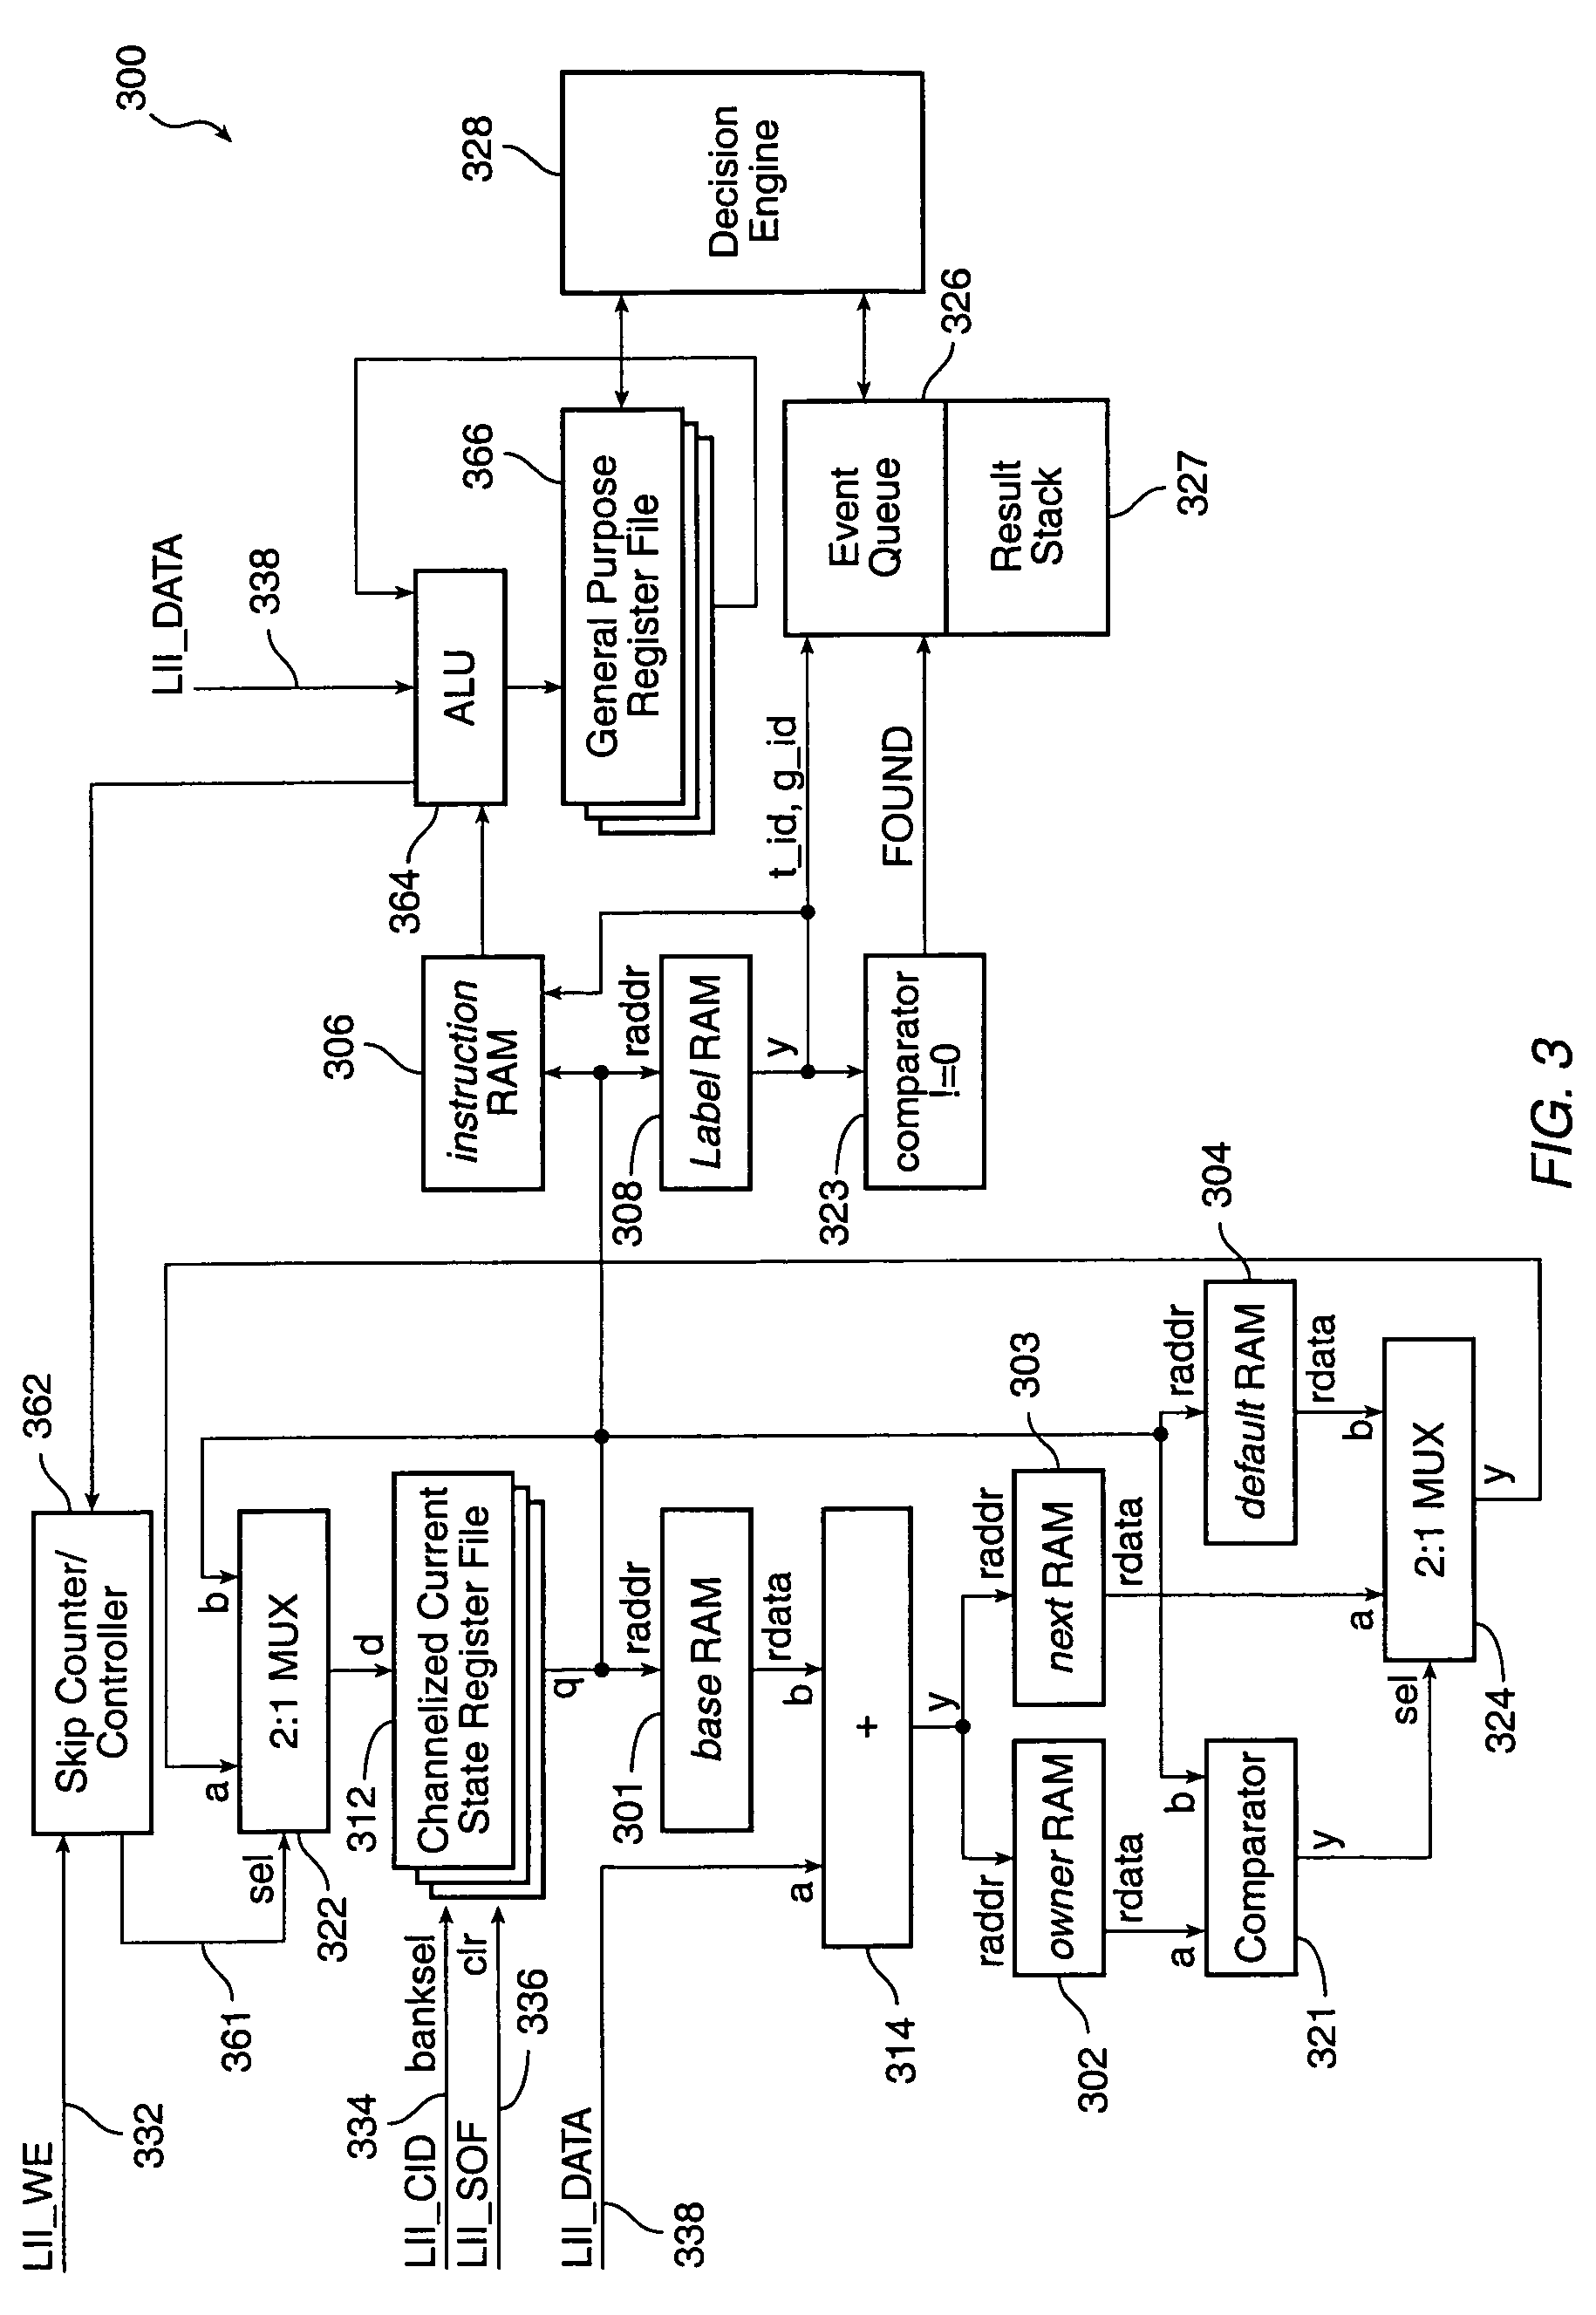 Method and apparatus for grammatical packet classifier